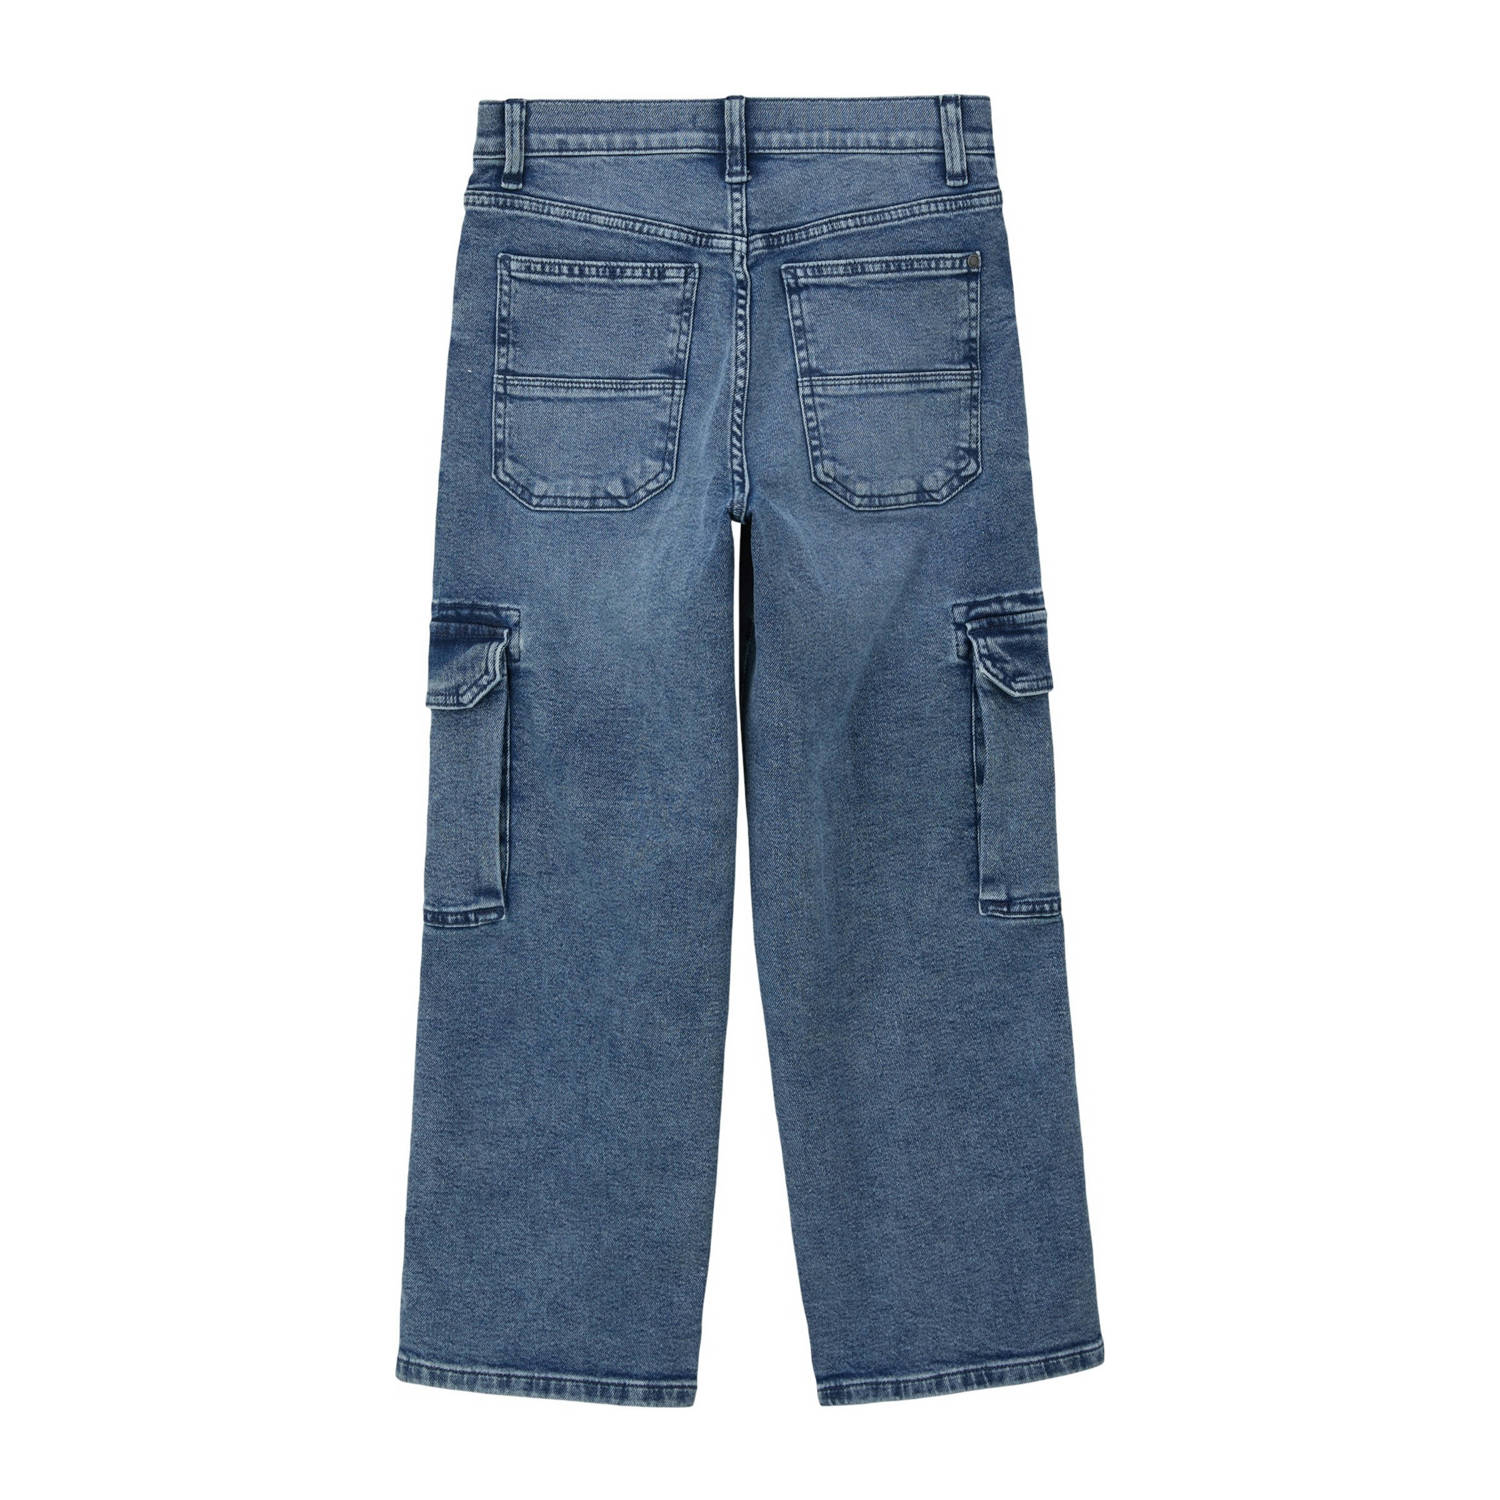 s.Oliver straight fit jeans blauw